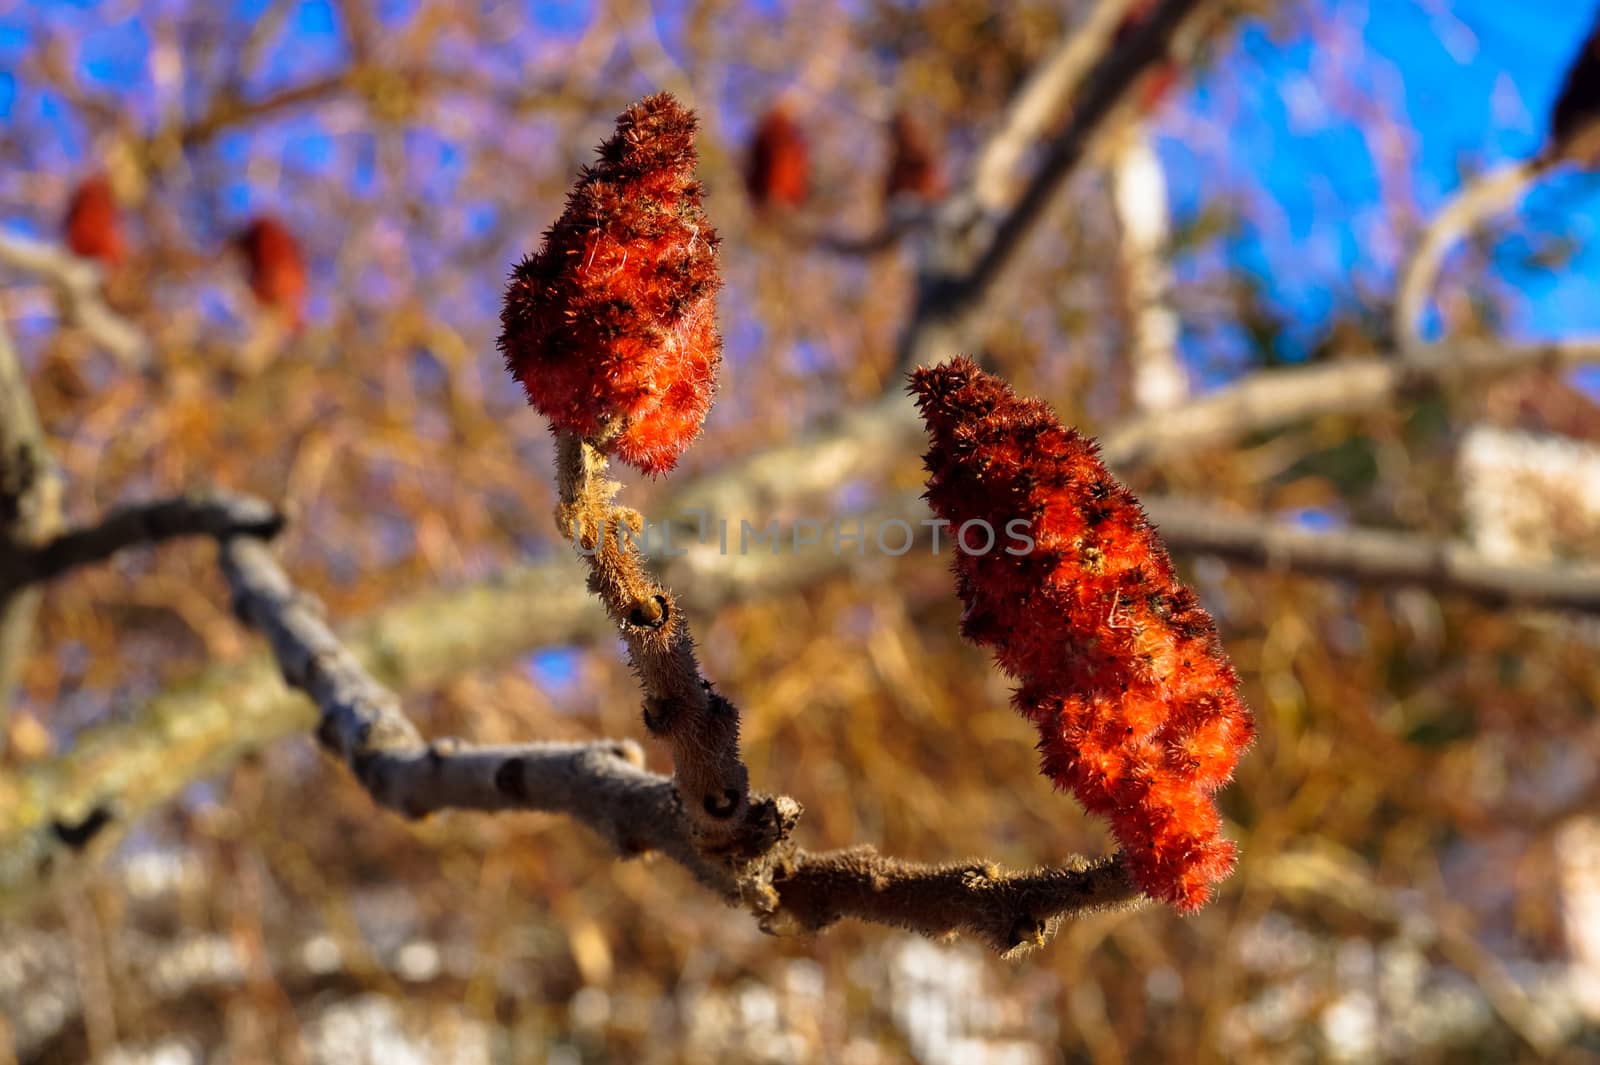 amazing fluffy red flower on a tree branch